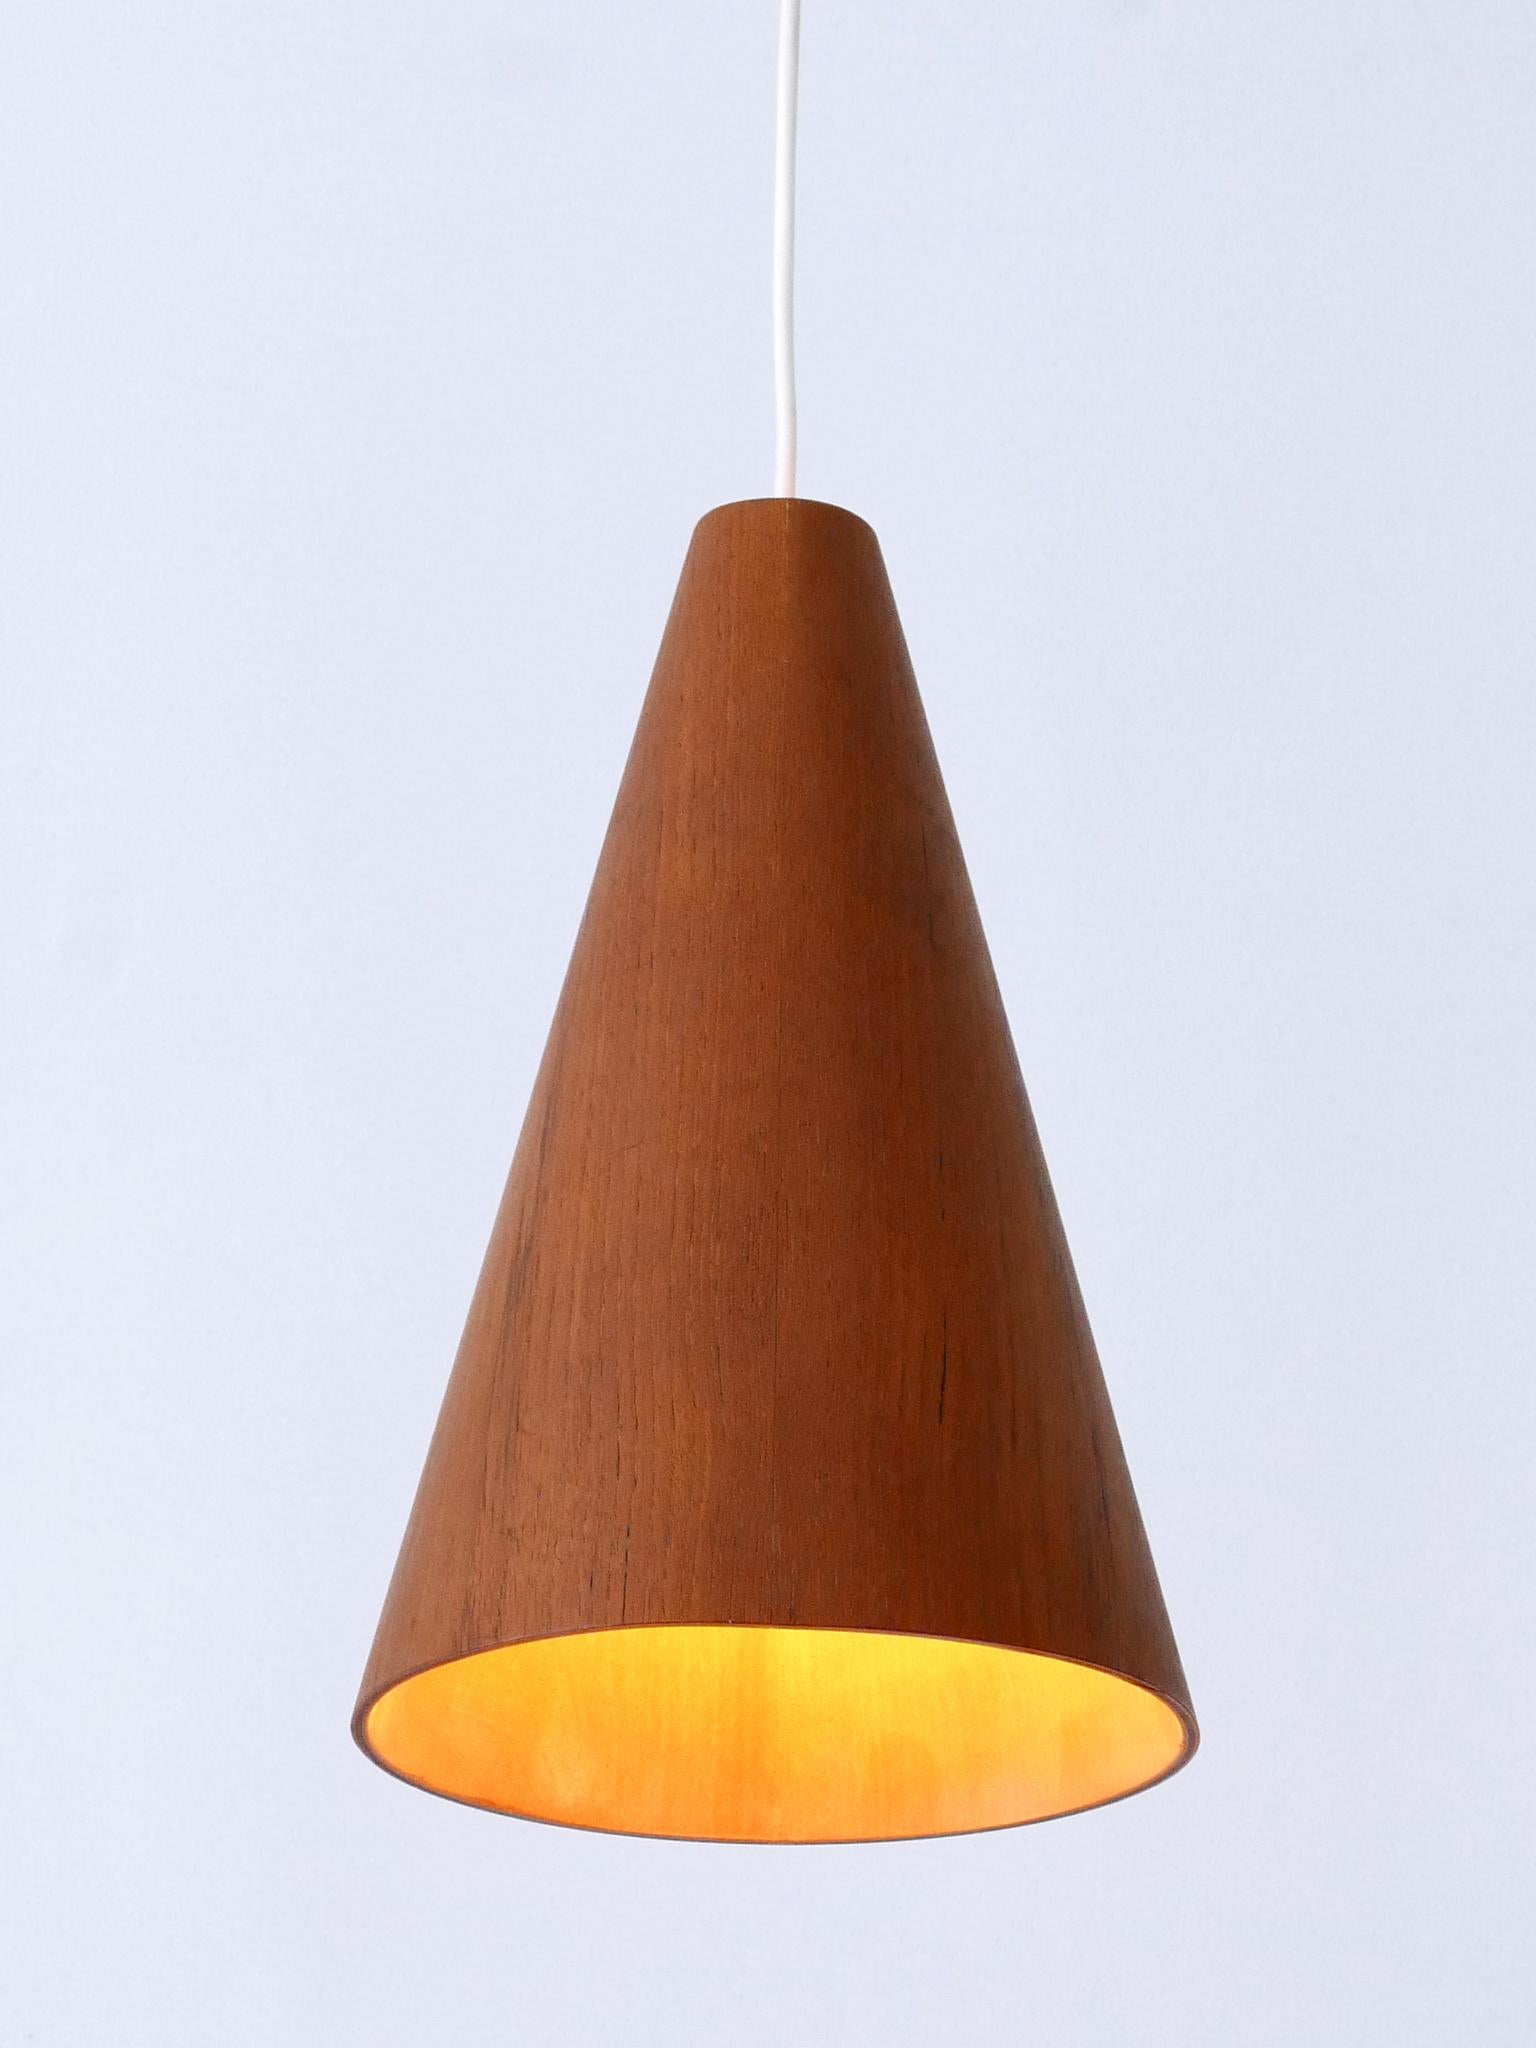 Rare and elegant Mid-Century Modern teak wood pendant lamp or hanging light. Designed & manufactured in Scandinavia, 1960s.

Executed in teak wood, the lamp comes with 1 x E27 / E26 Edison screw fit bulb socket, is wired and in working condition. It